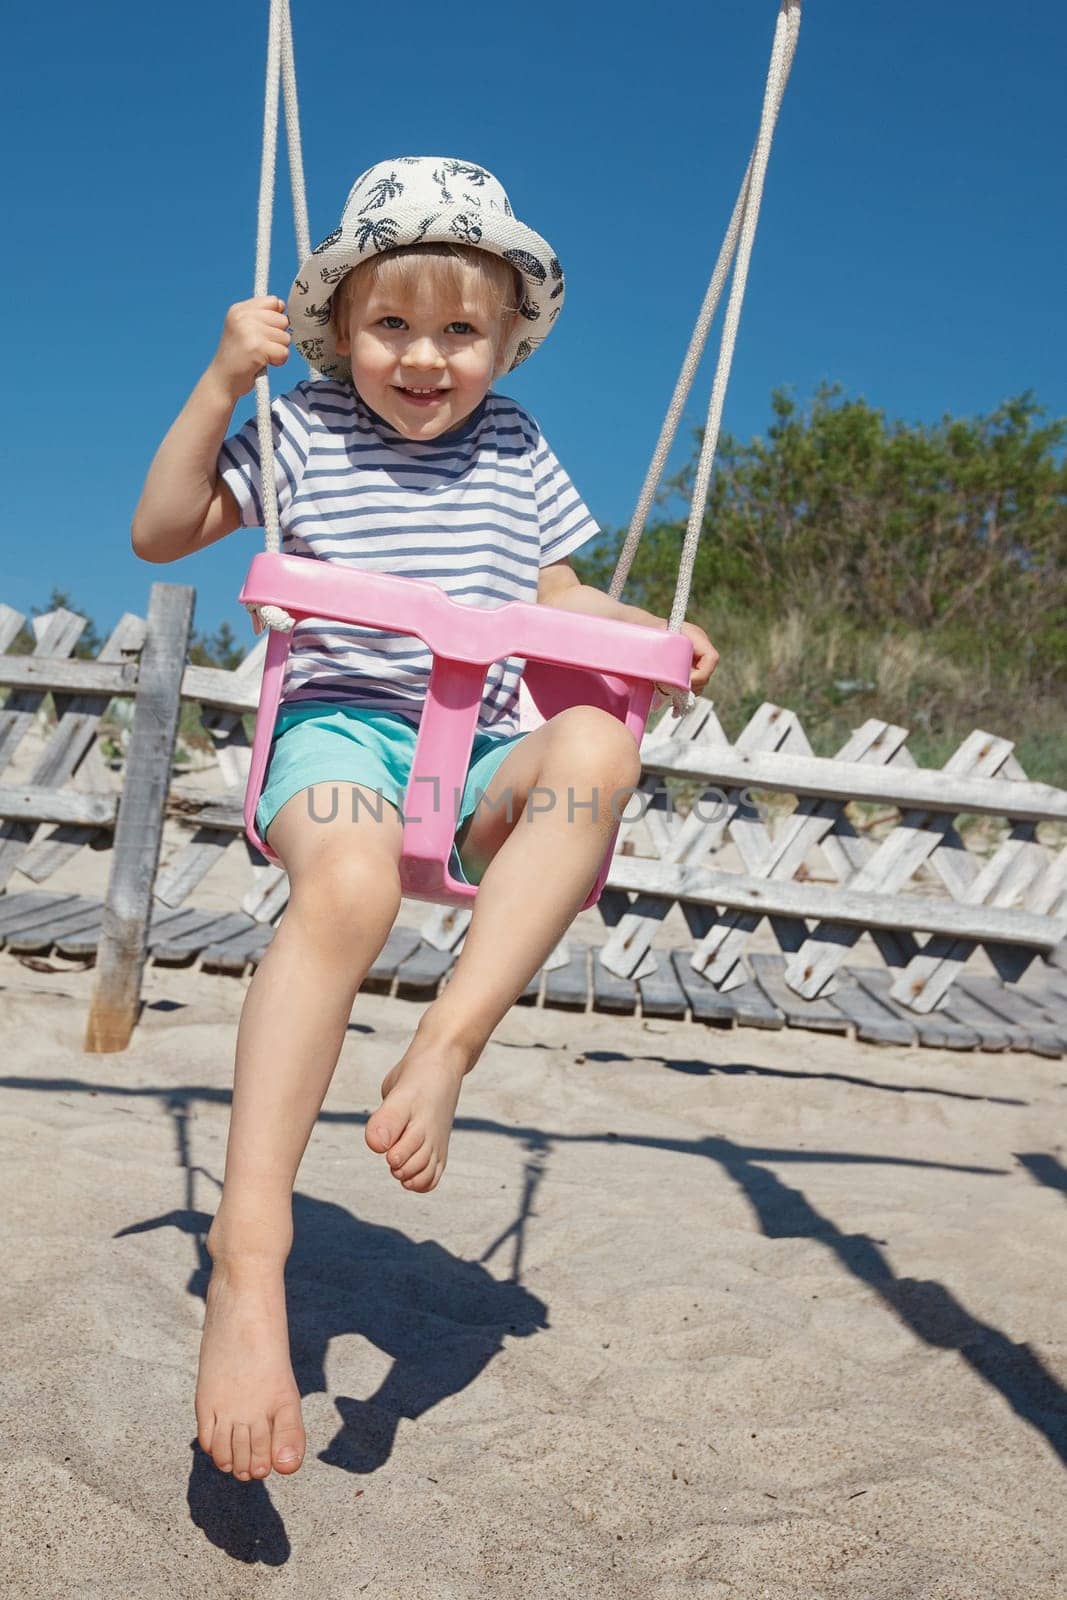 The little hilarious boy swings in a pink swing, he looks straight at the camera and poses. Beach background, sand and blue sky